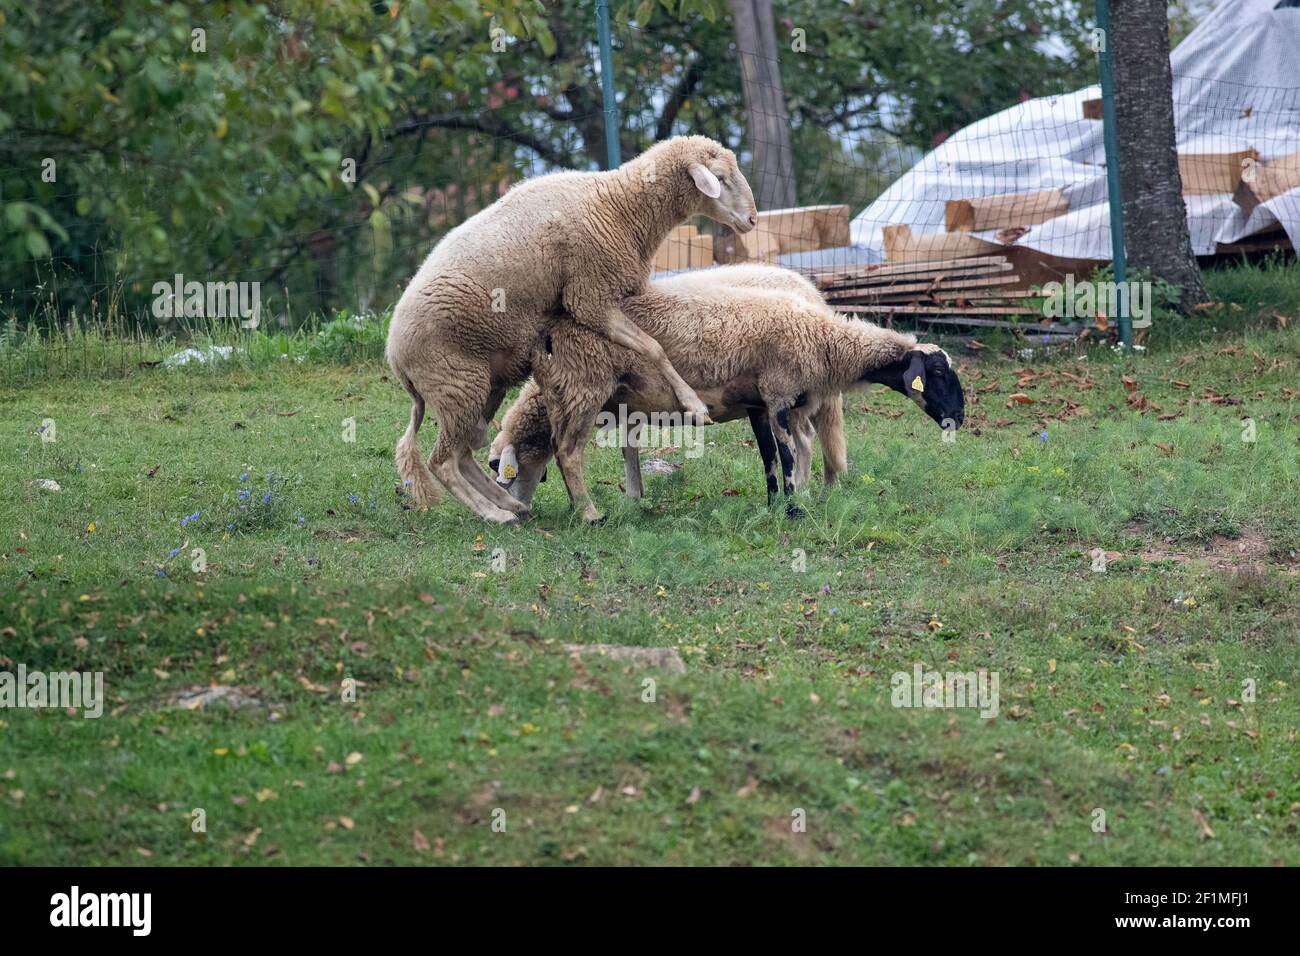 The sheep couples mating in a sheep yard Stock Photo